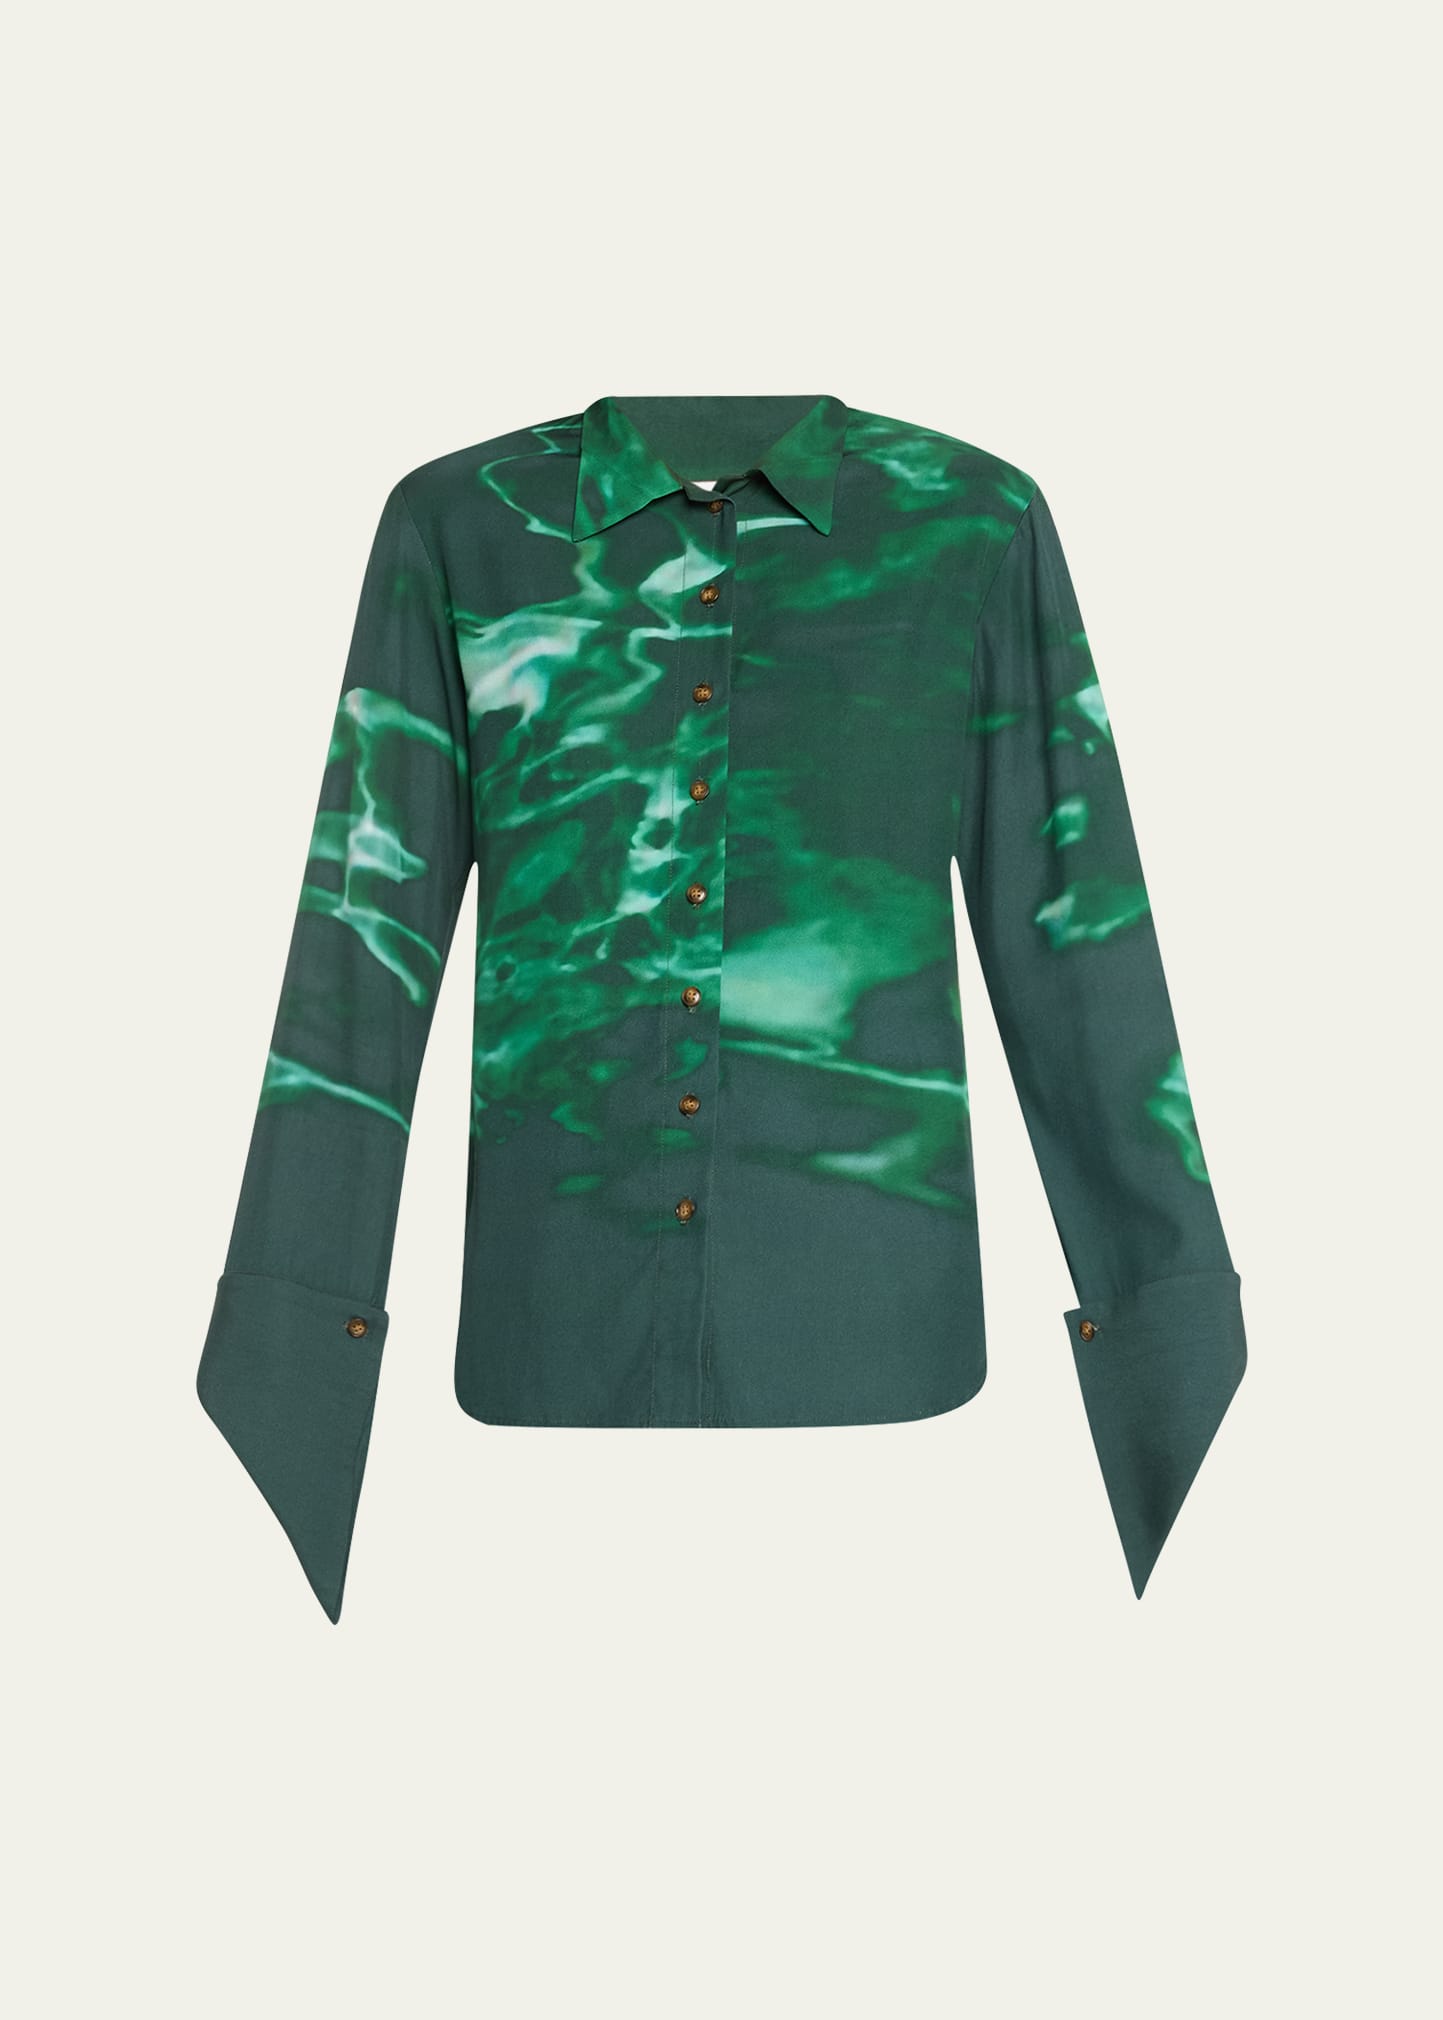 Rosie Assoulin Pool Print Button-front Top With French Cuffs In Dark Green